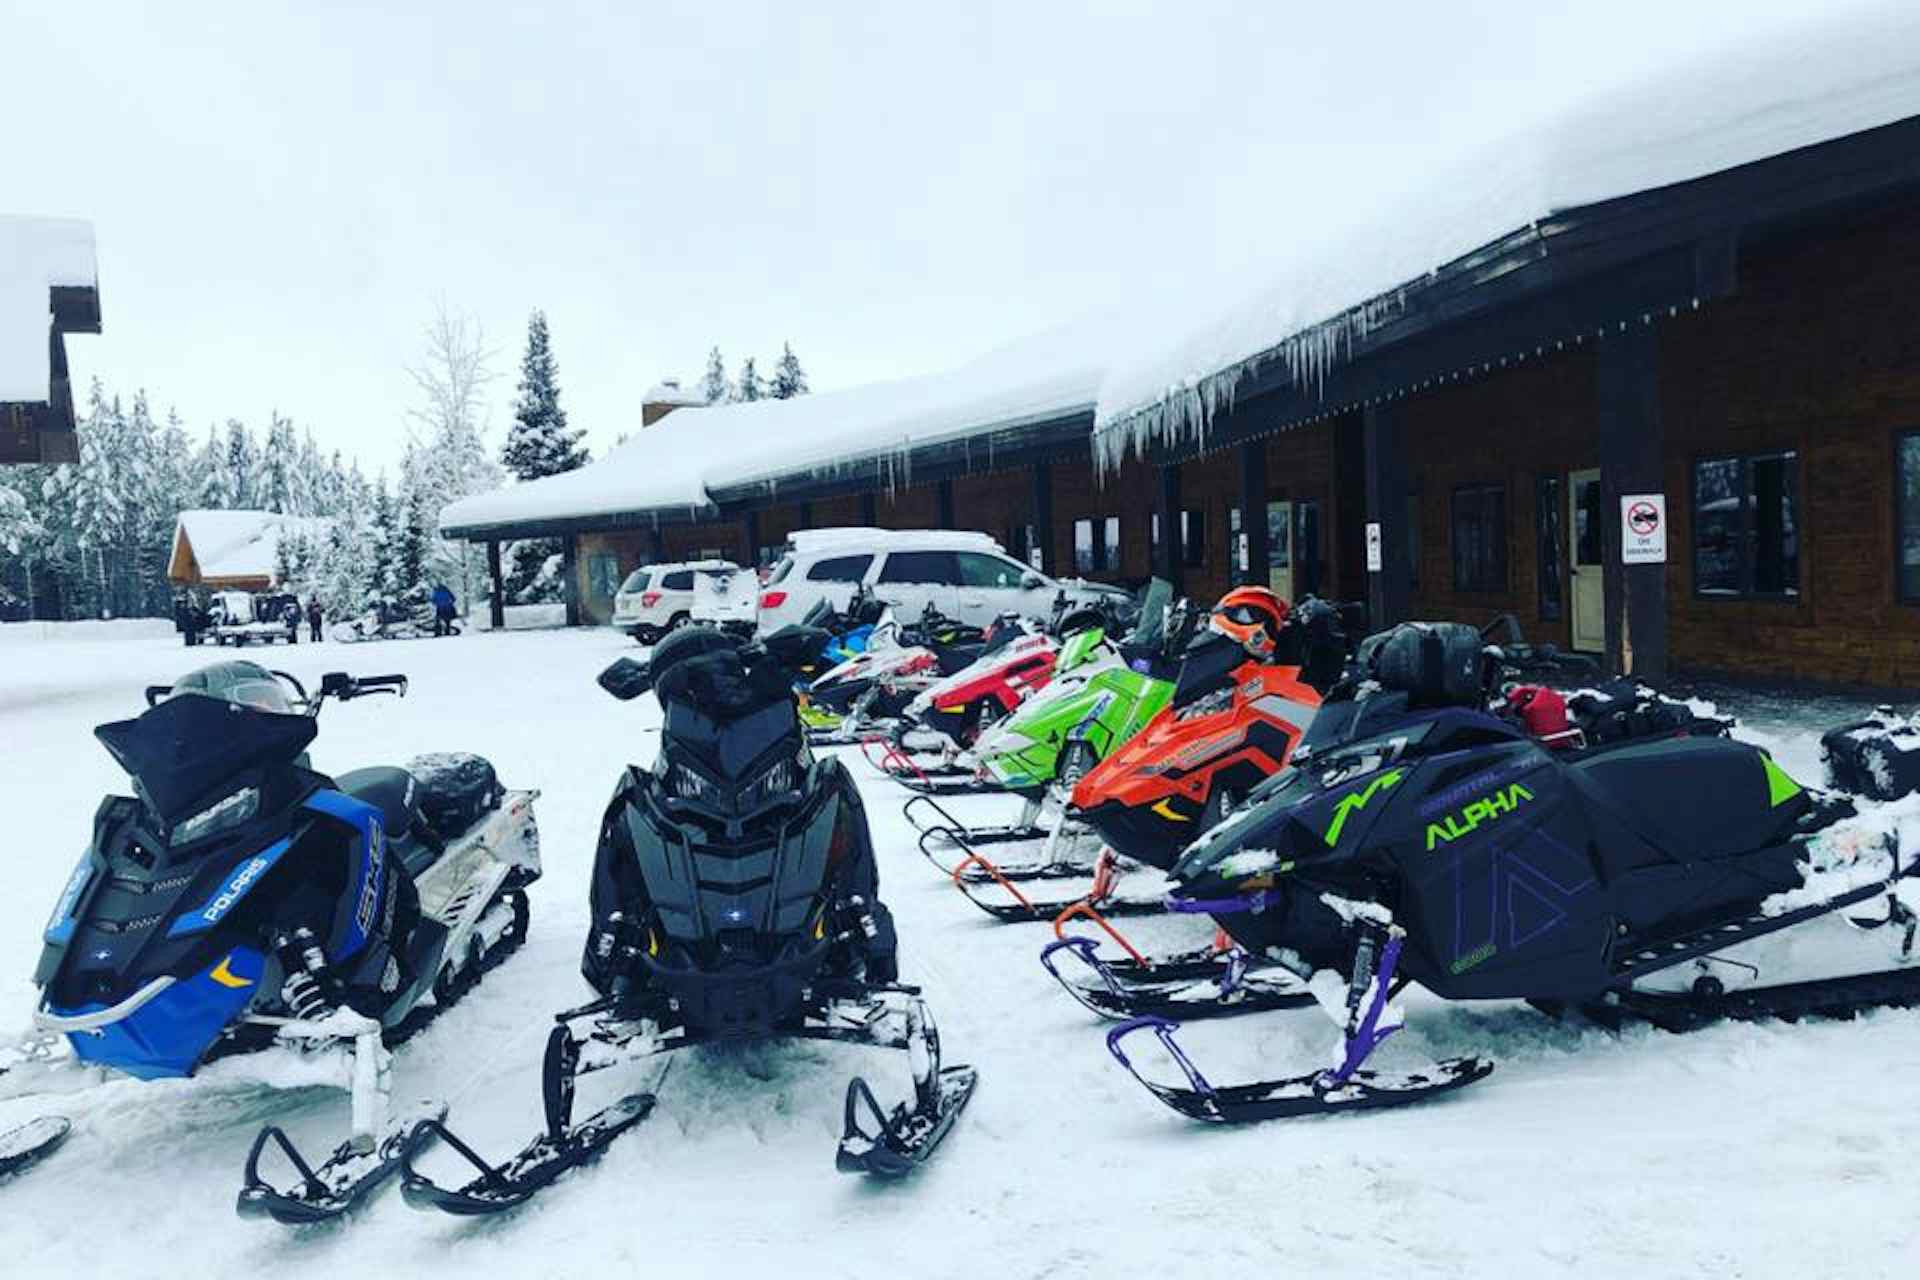 Snowmobiles belonging to guests residing at the Pond's Lodge in the Yellowstone Teton Territory